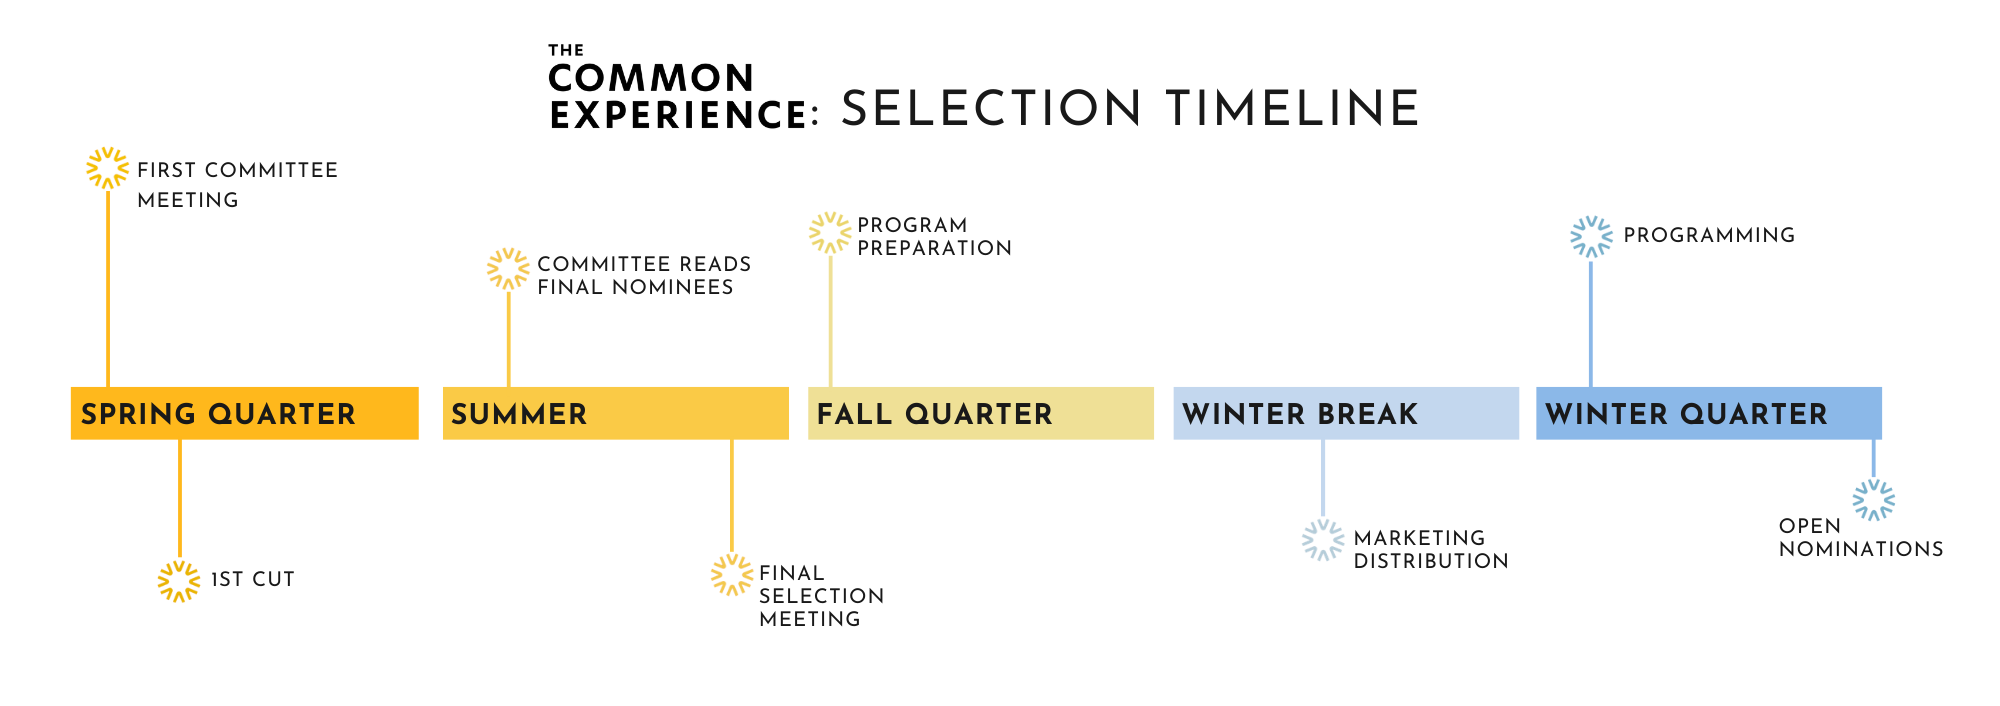 COMMON EXPERIENCE TIMELINE